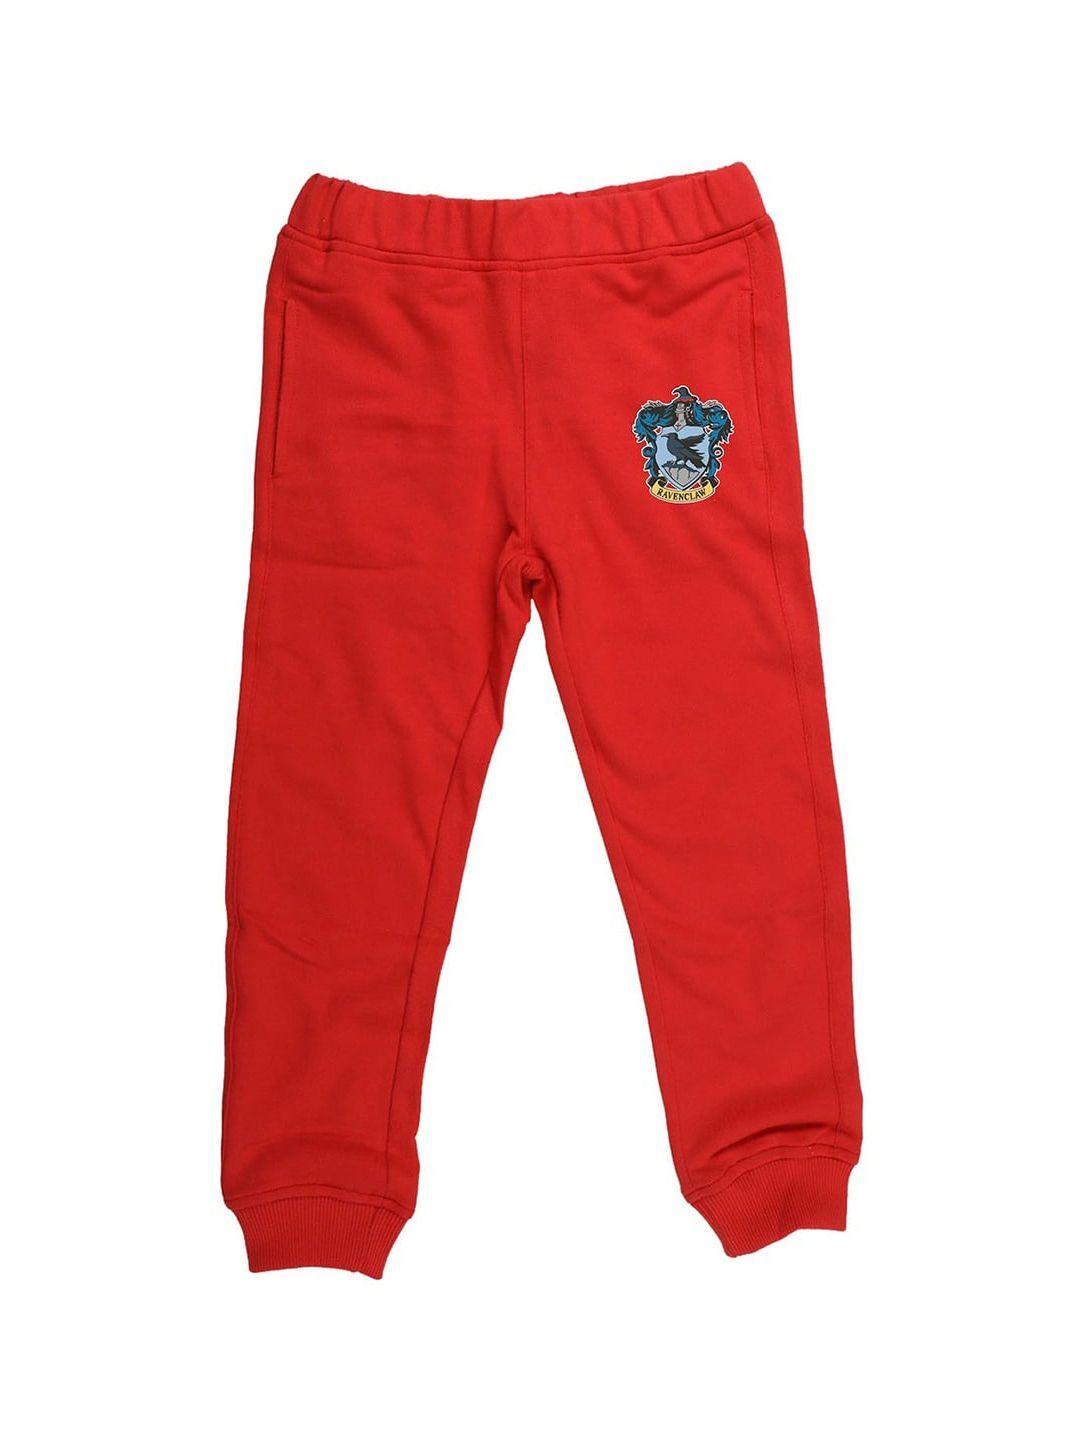 harry potter by wear your mind boys red solid joggers